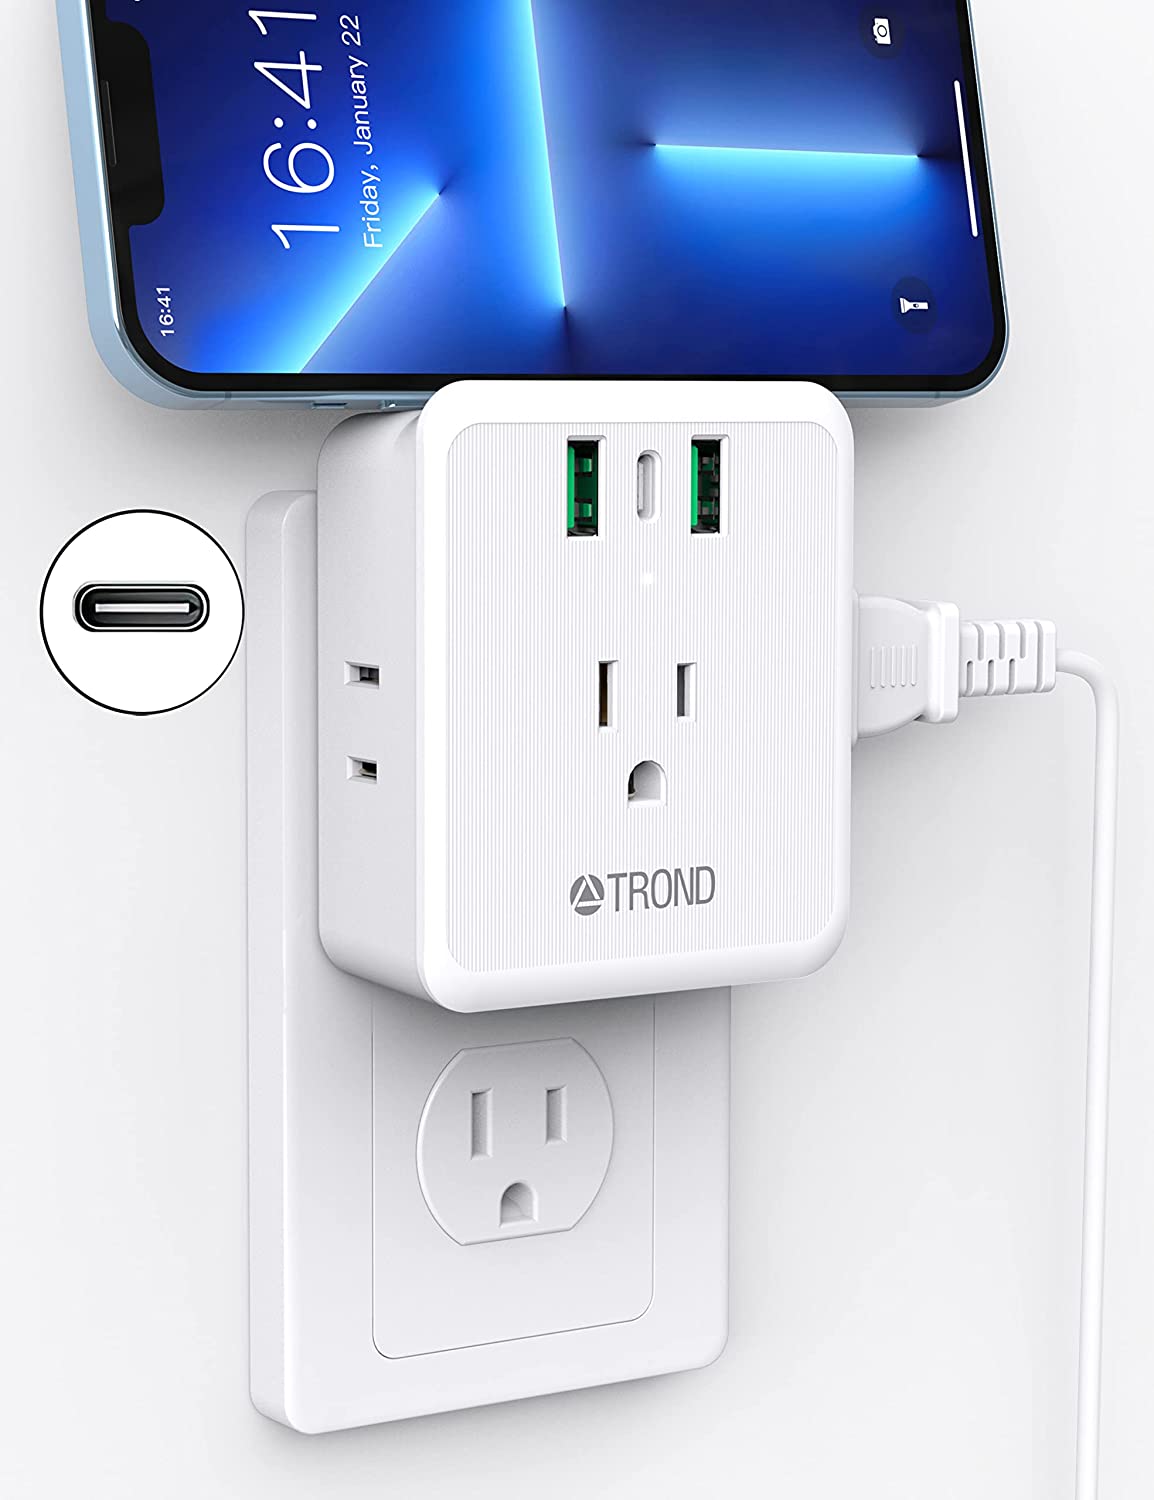 Trond 7-in-1 Multi Plug Outlet Extender (One 3-Pin & Three 2-Pin AC Outlets and 2 USB-A & 1 USB-C Charging Ports) $6.99 + Free Shipping w/ Prime or on $25+